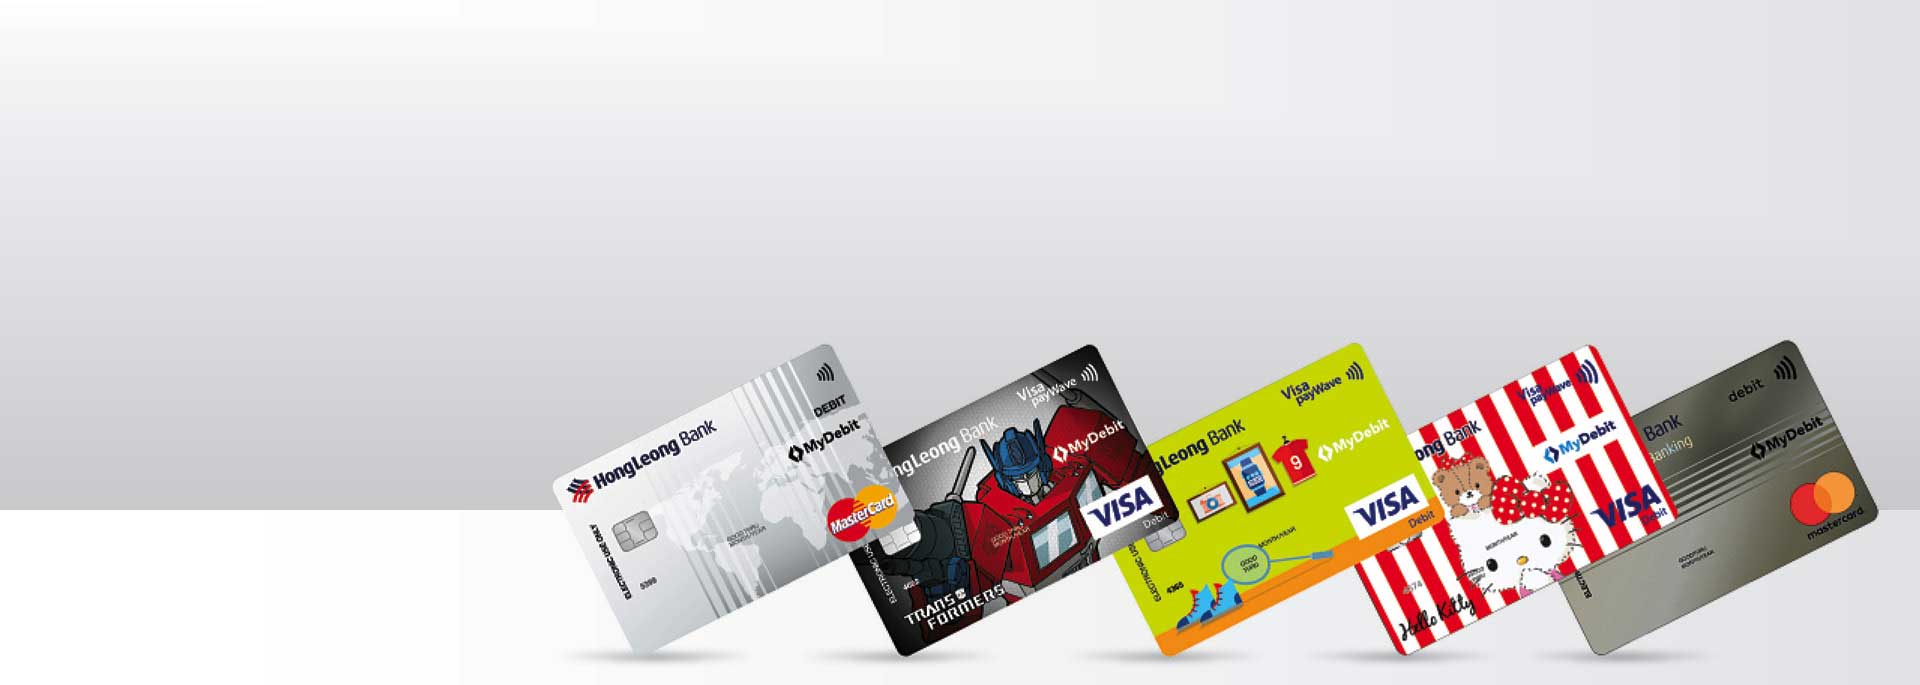 debit card protection banner